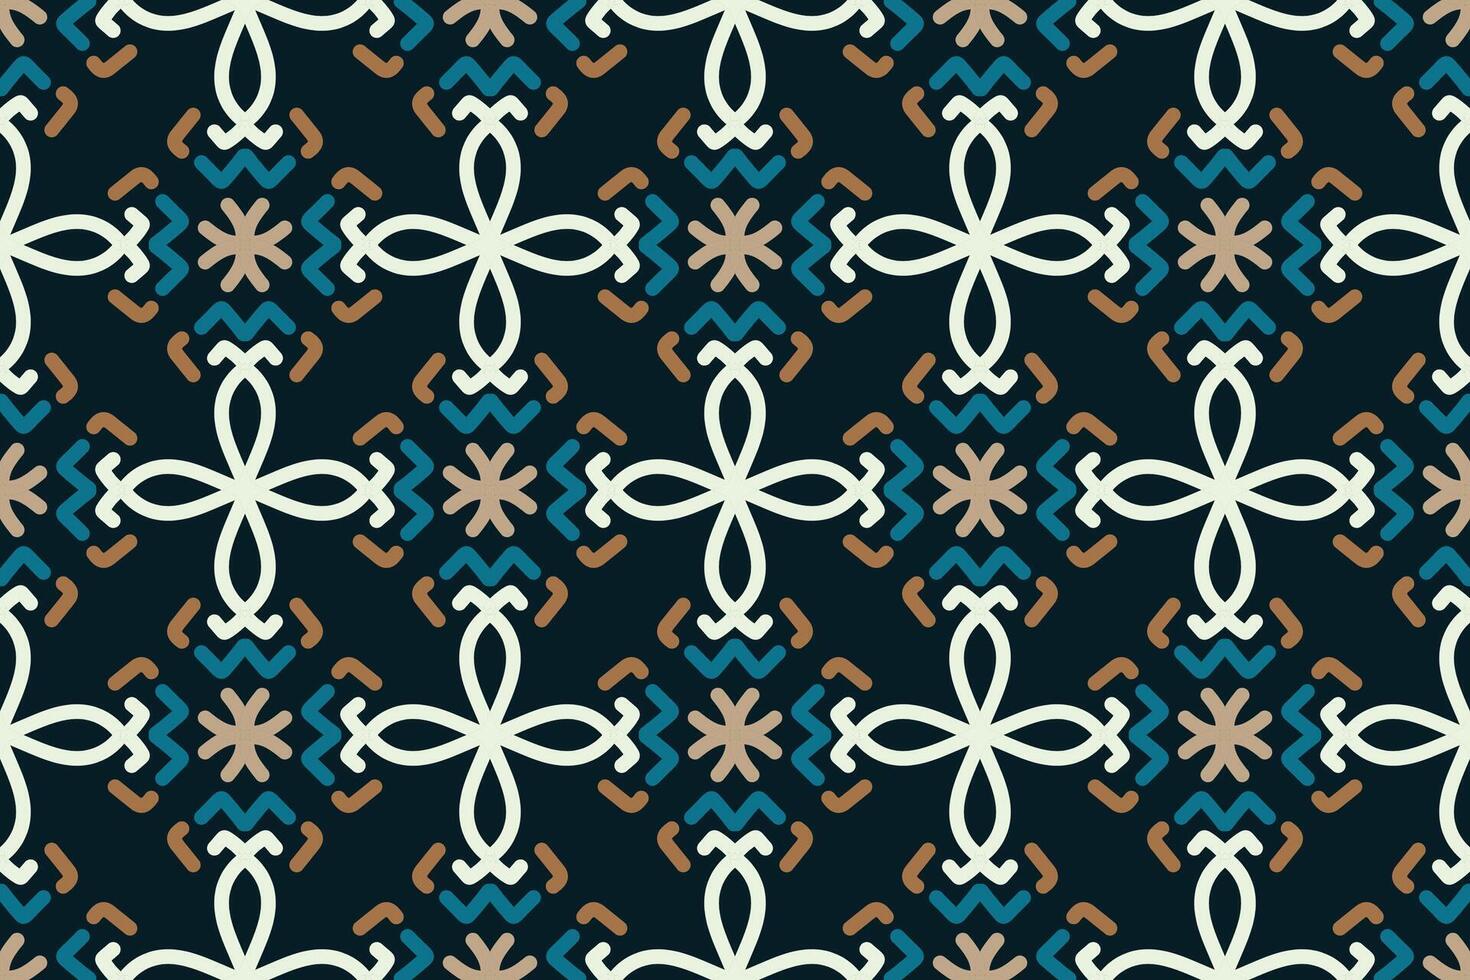 vintage seamless pattern with blue color vector